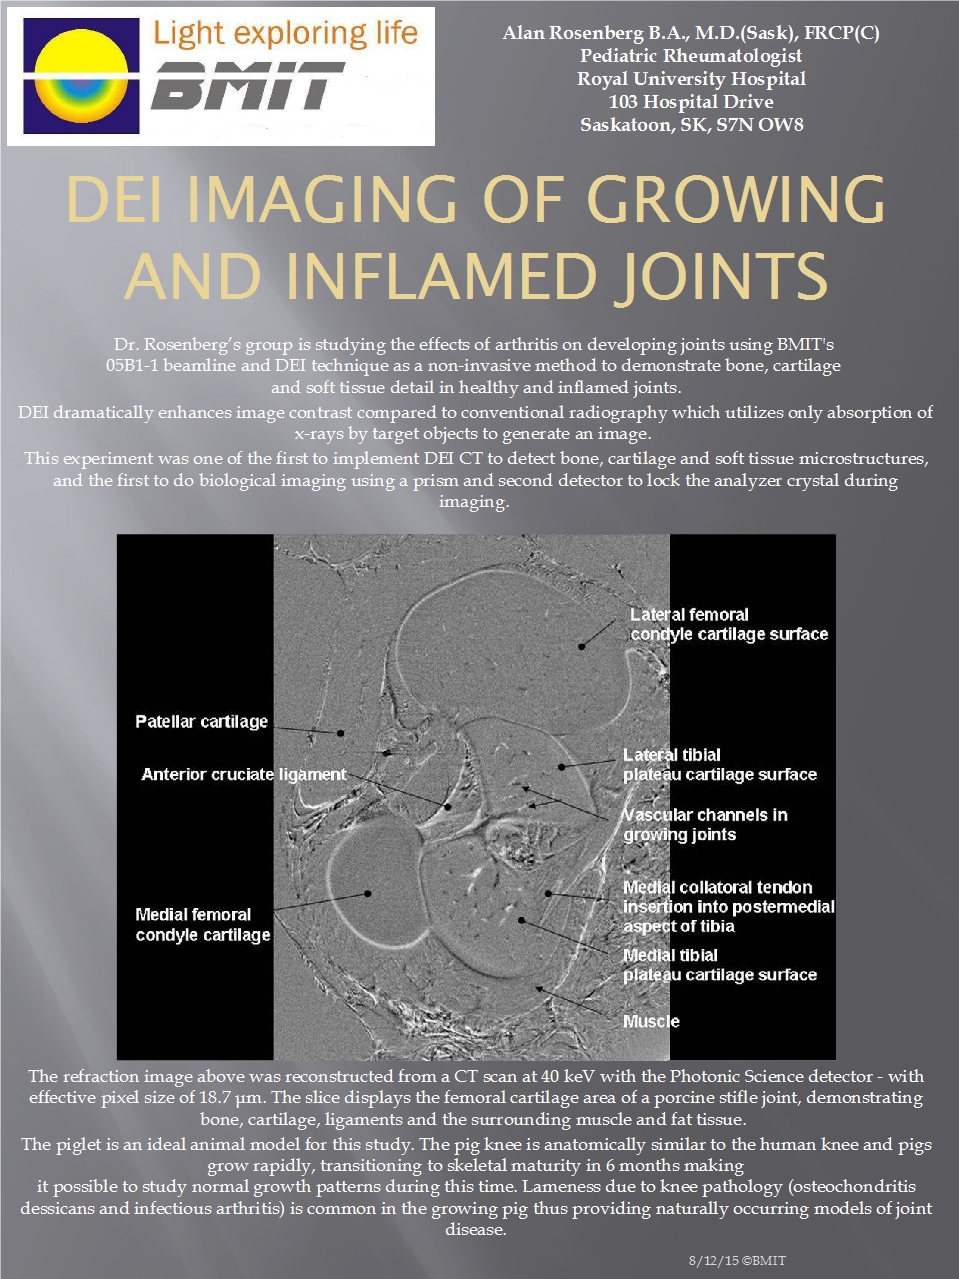 DEI Imaging of Growing and Inflamed Joints Image